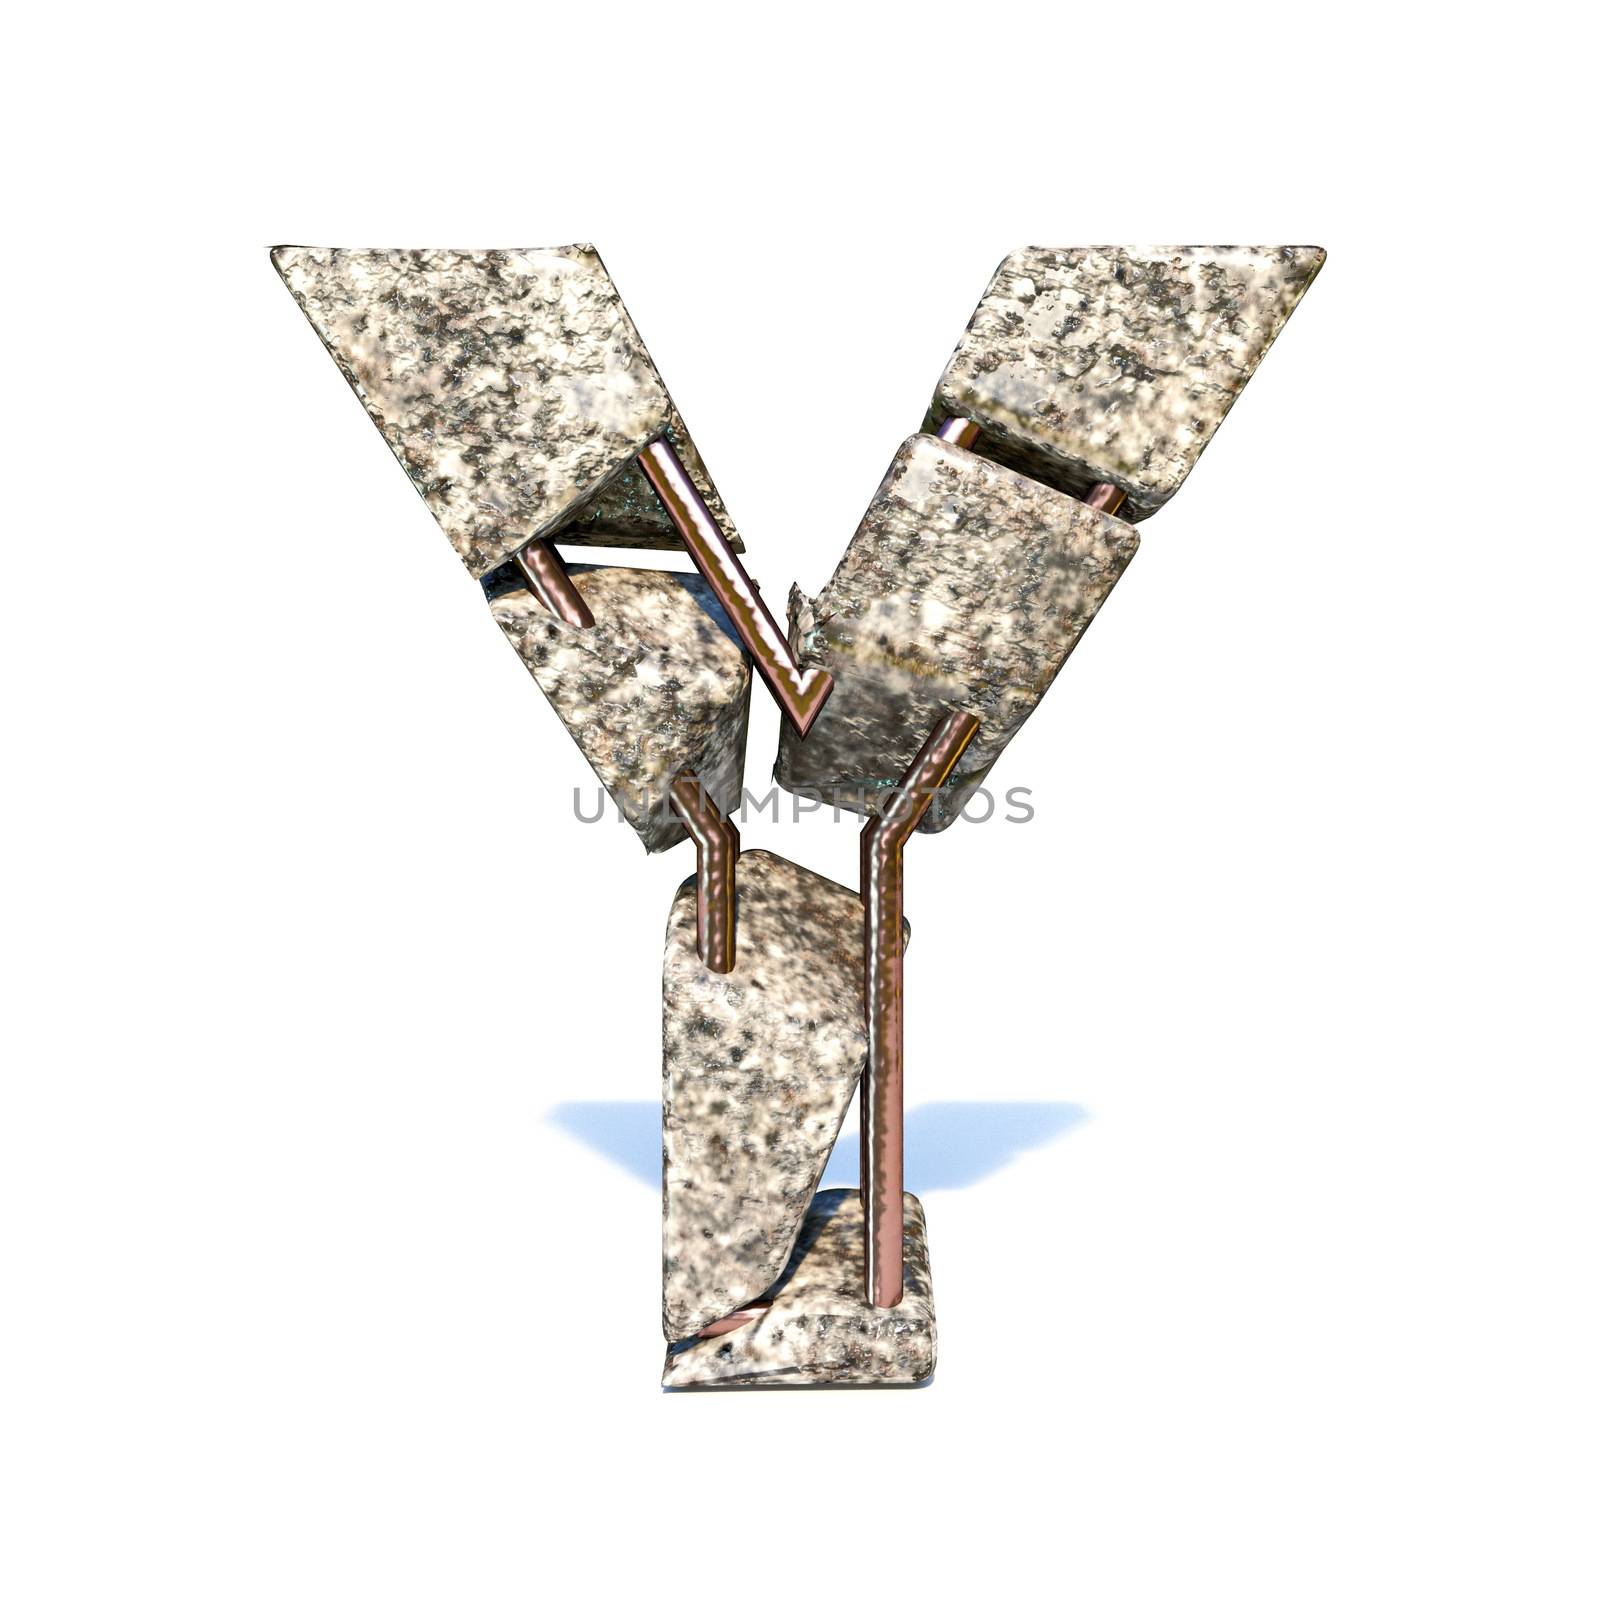 Concrete fracture font Letter Y 3D render illustration isolated on white background